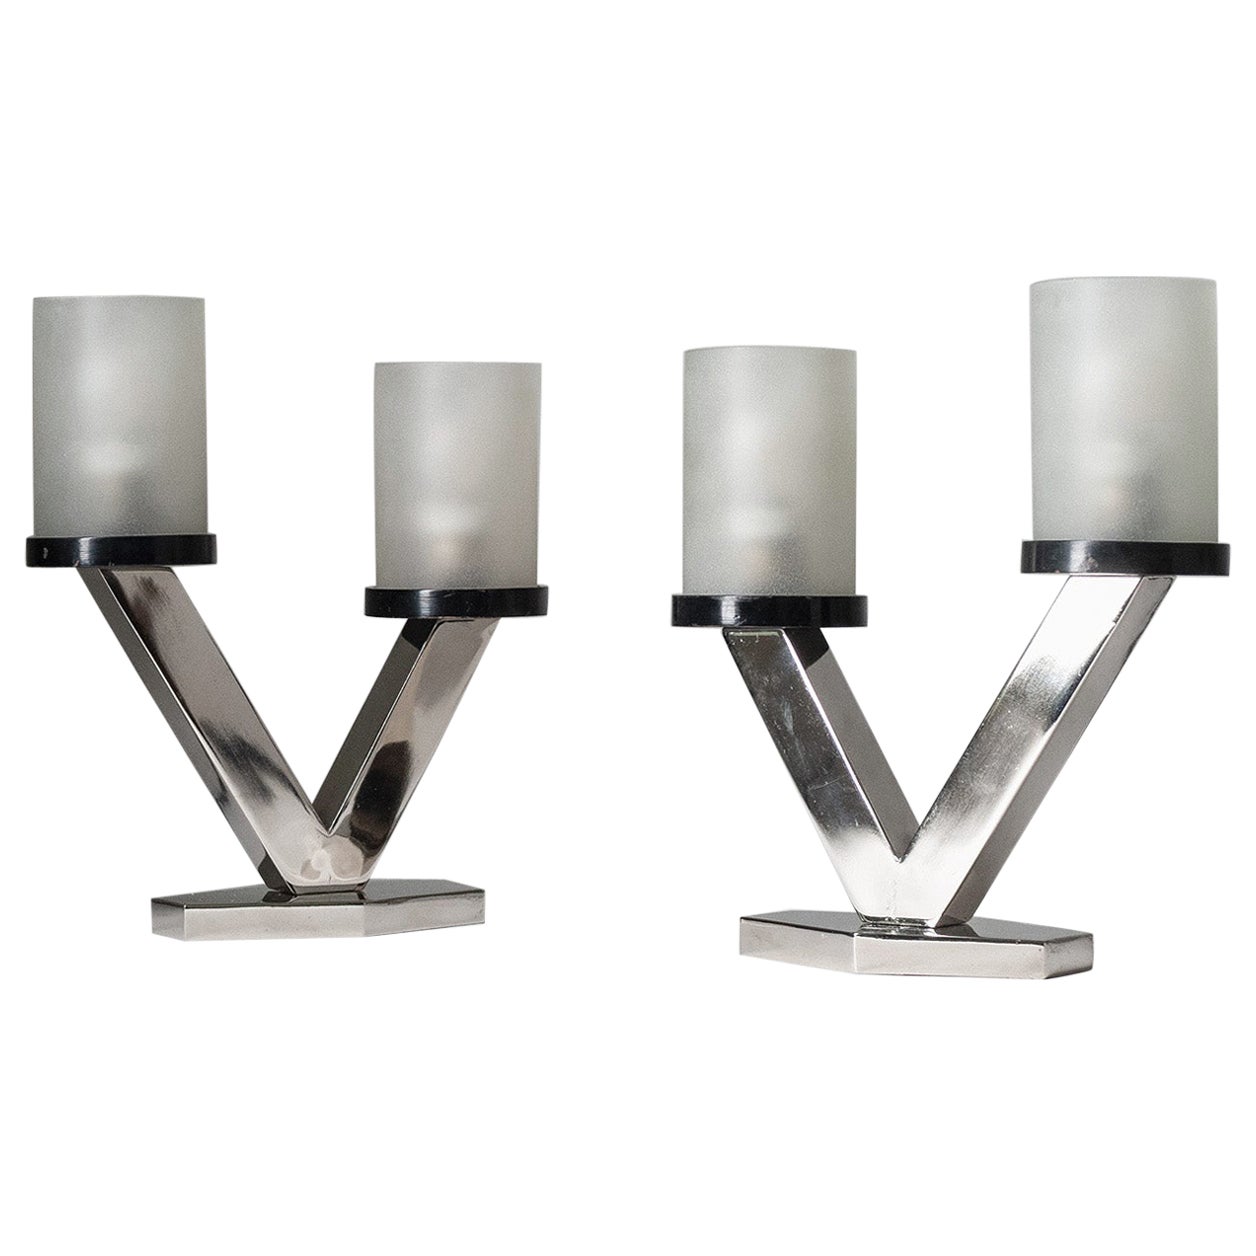 Art Deco Table Lamps, 1920s, Nickel and Glass For Sale